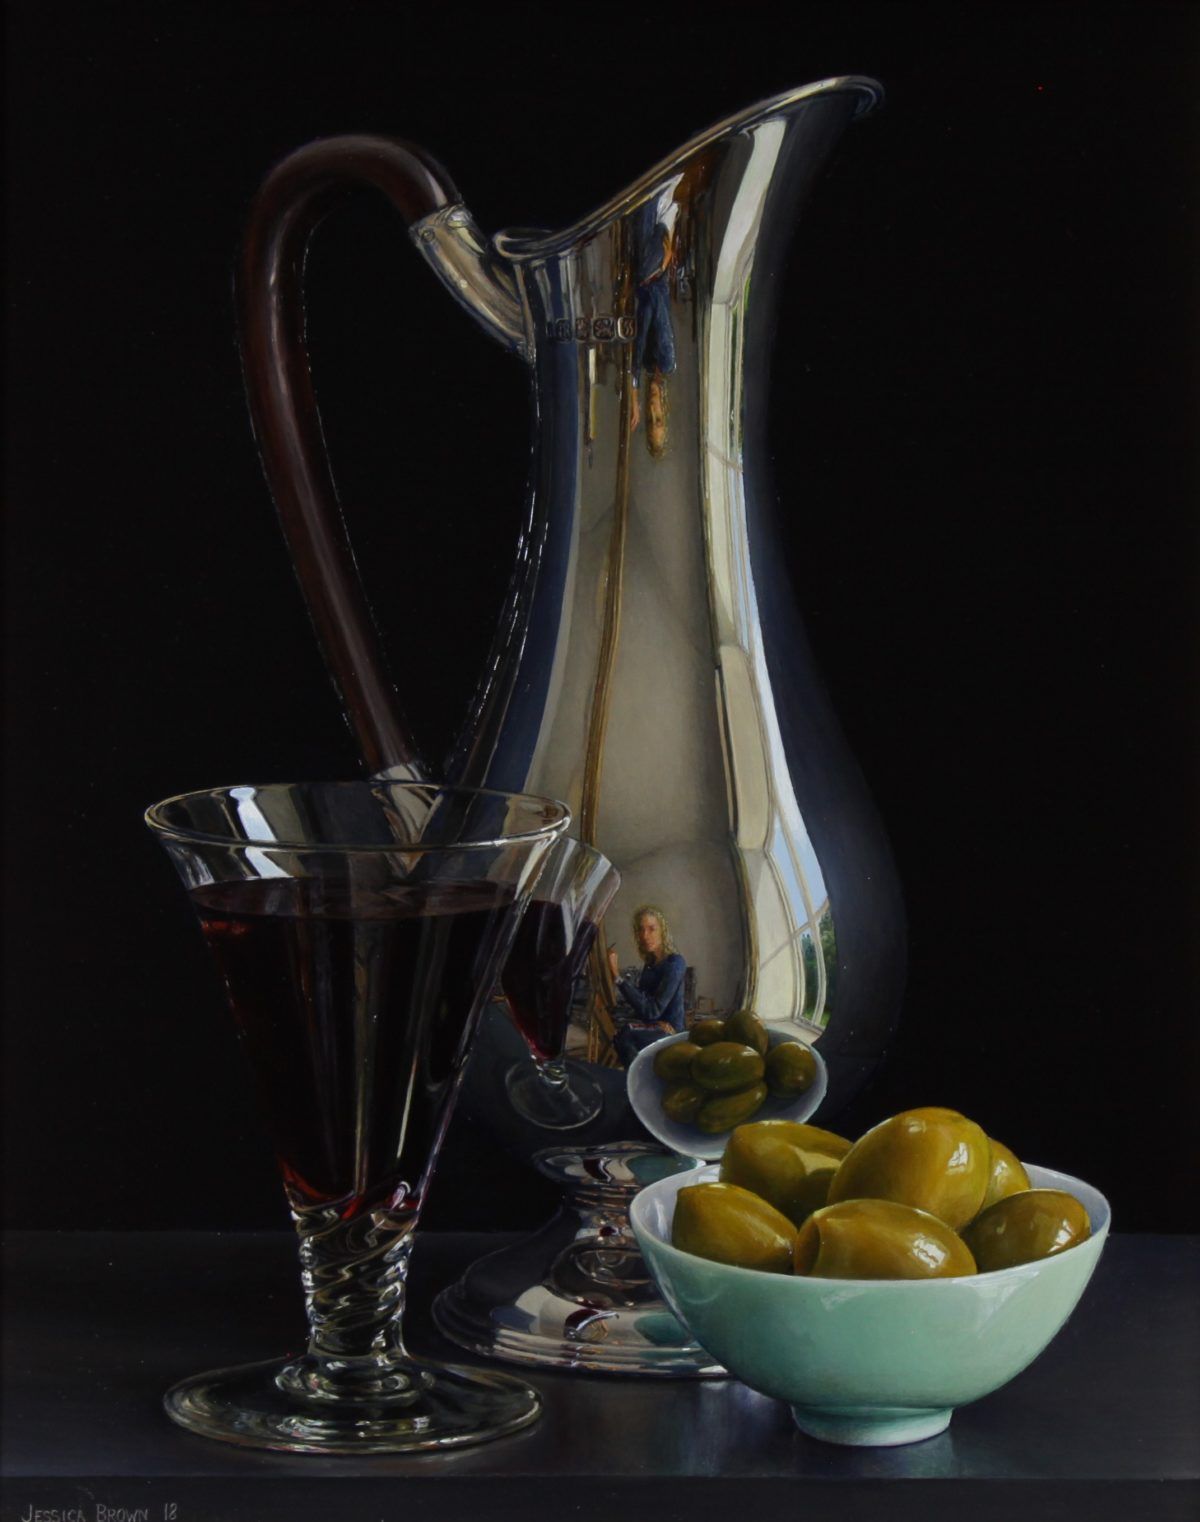 Still Life with Olives, Claret and Silver Art Nouveau Jug by Jessica Brown